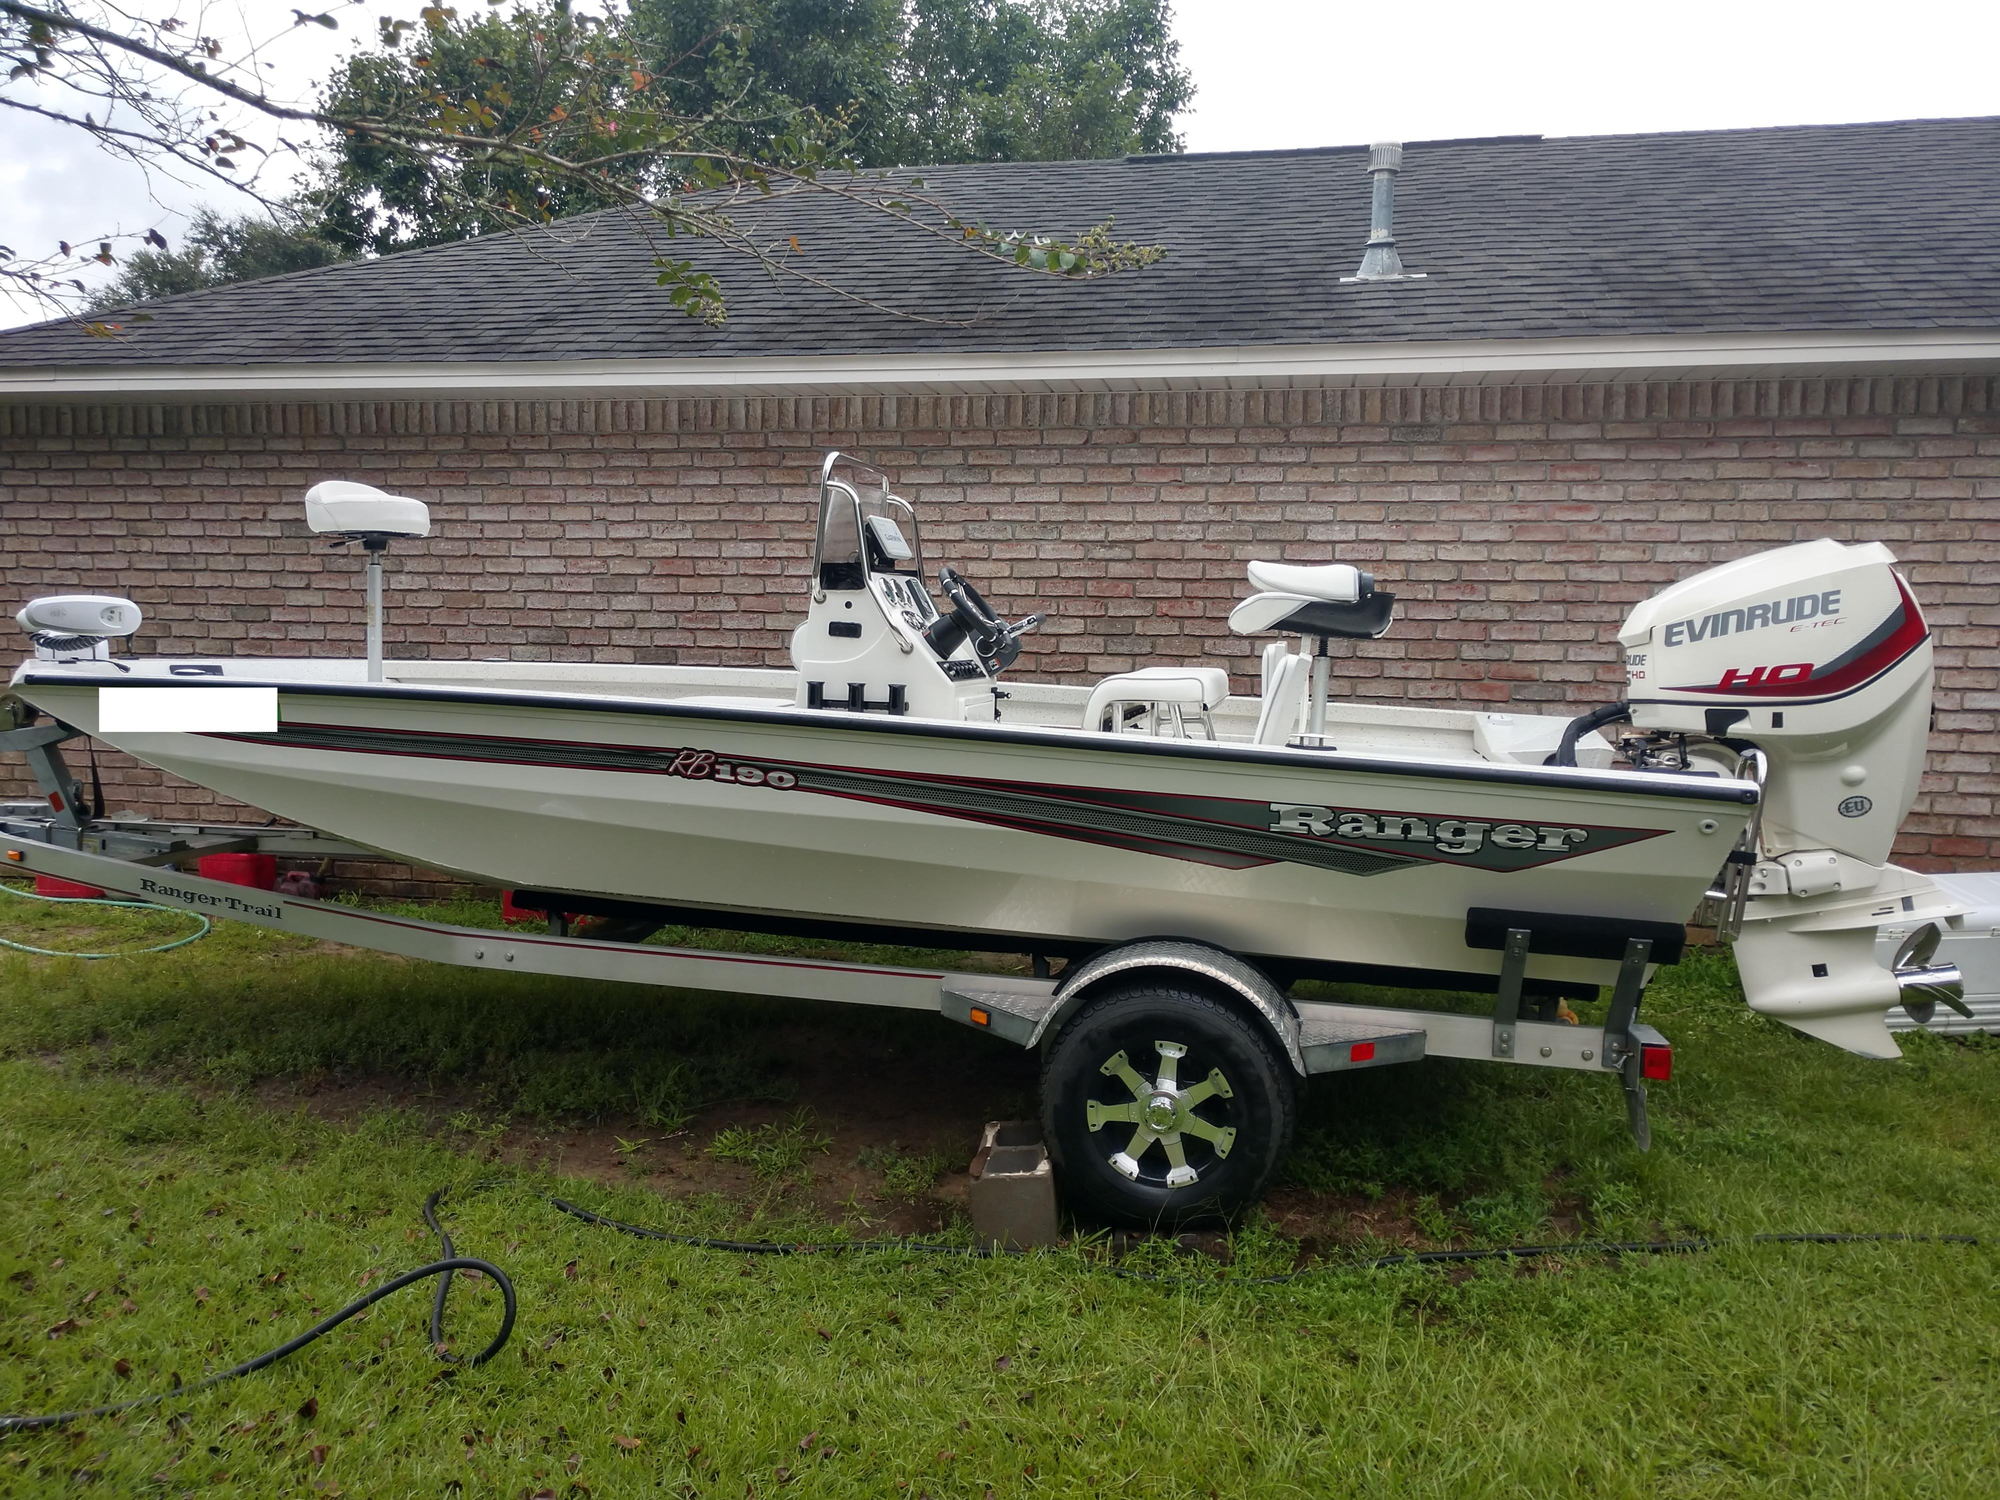 2017 Ranger RB 190 Bay Price Reduction Again! - The Hull Truth - Boating  and Fishing Forum